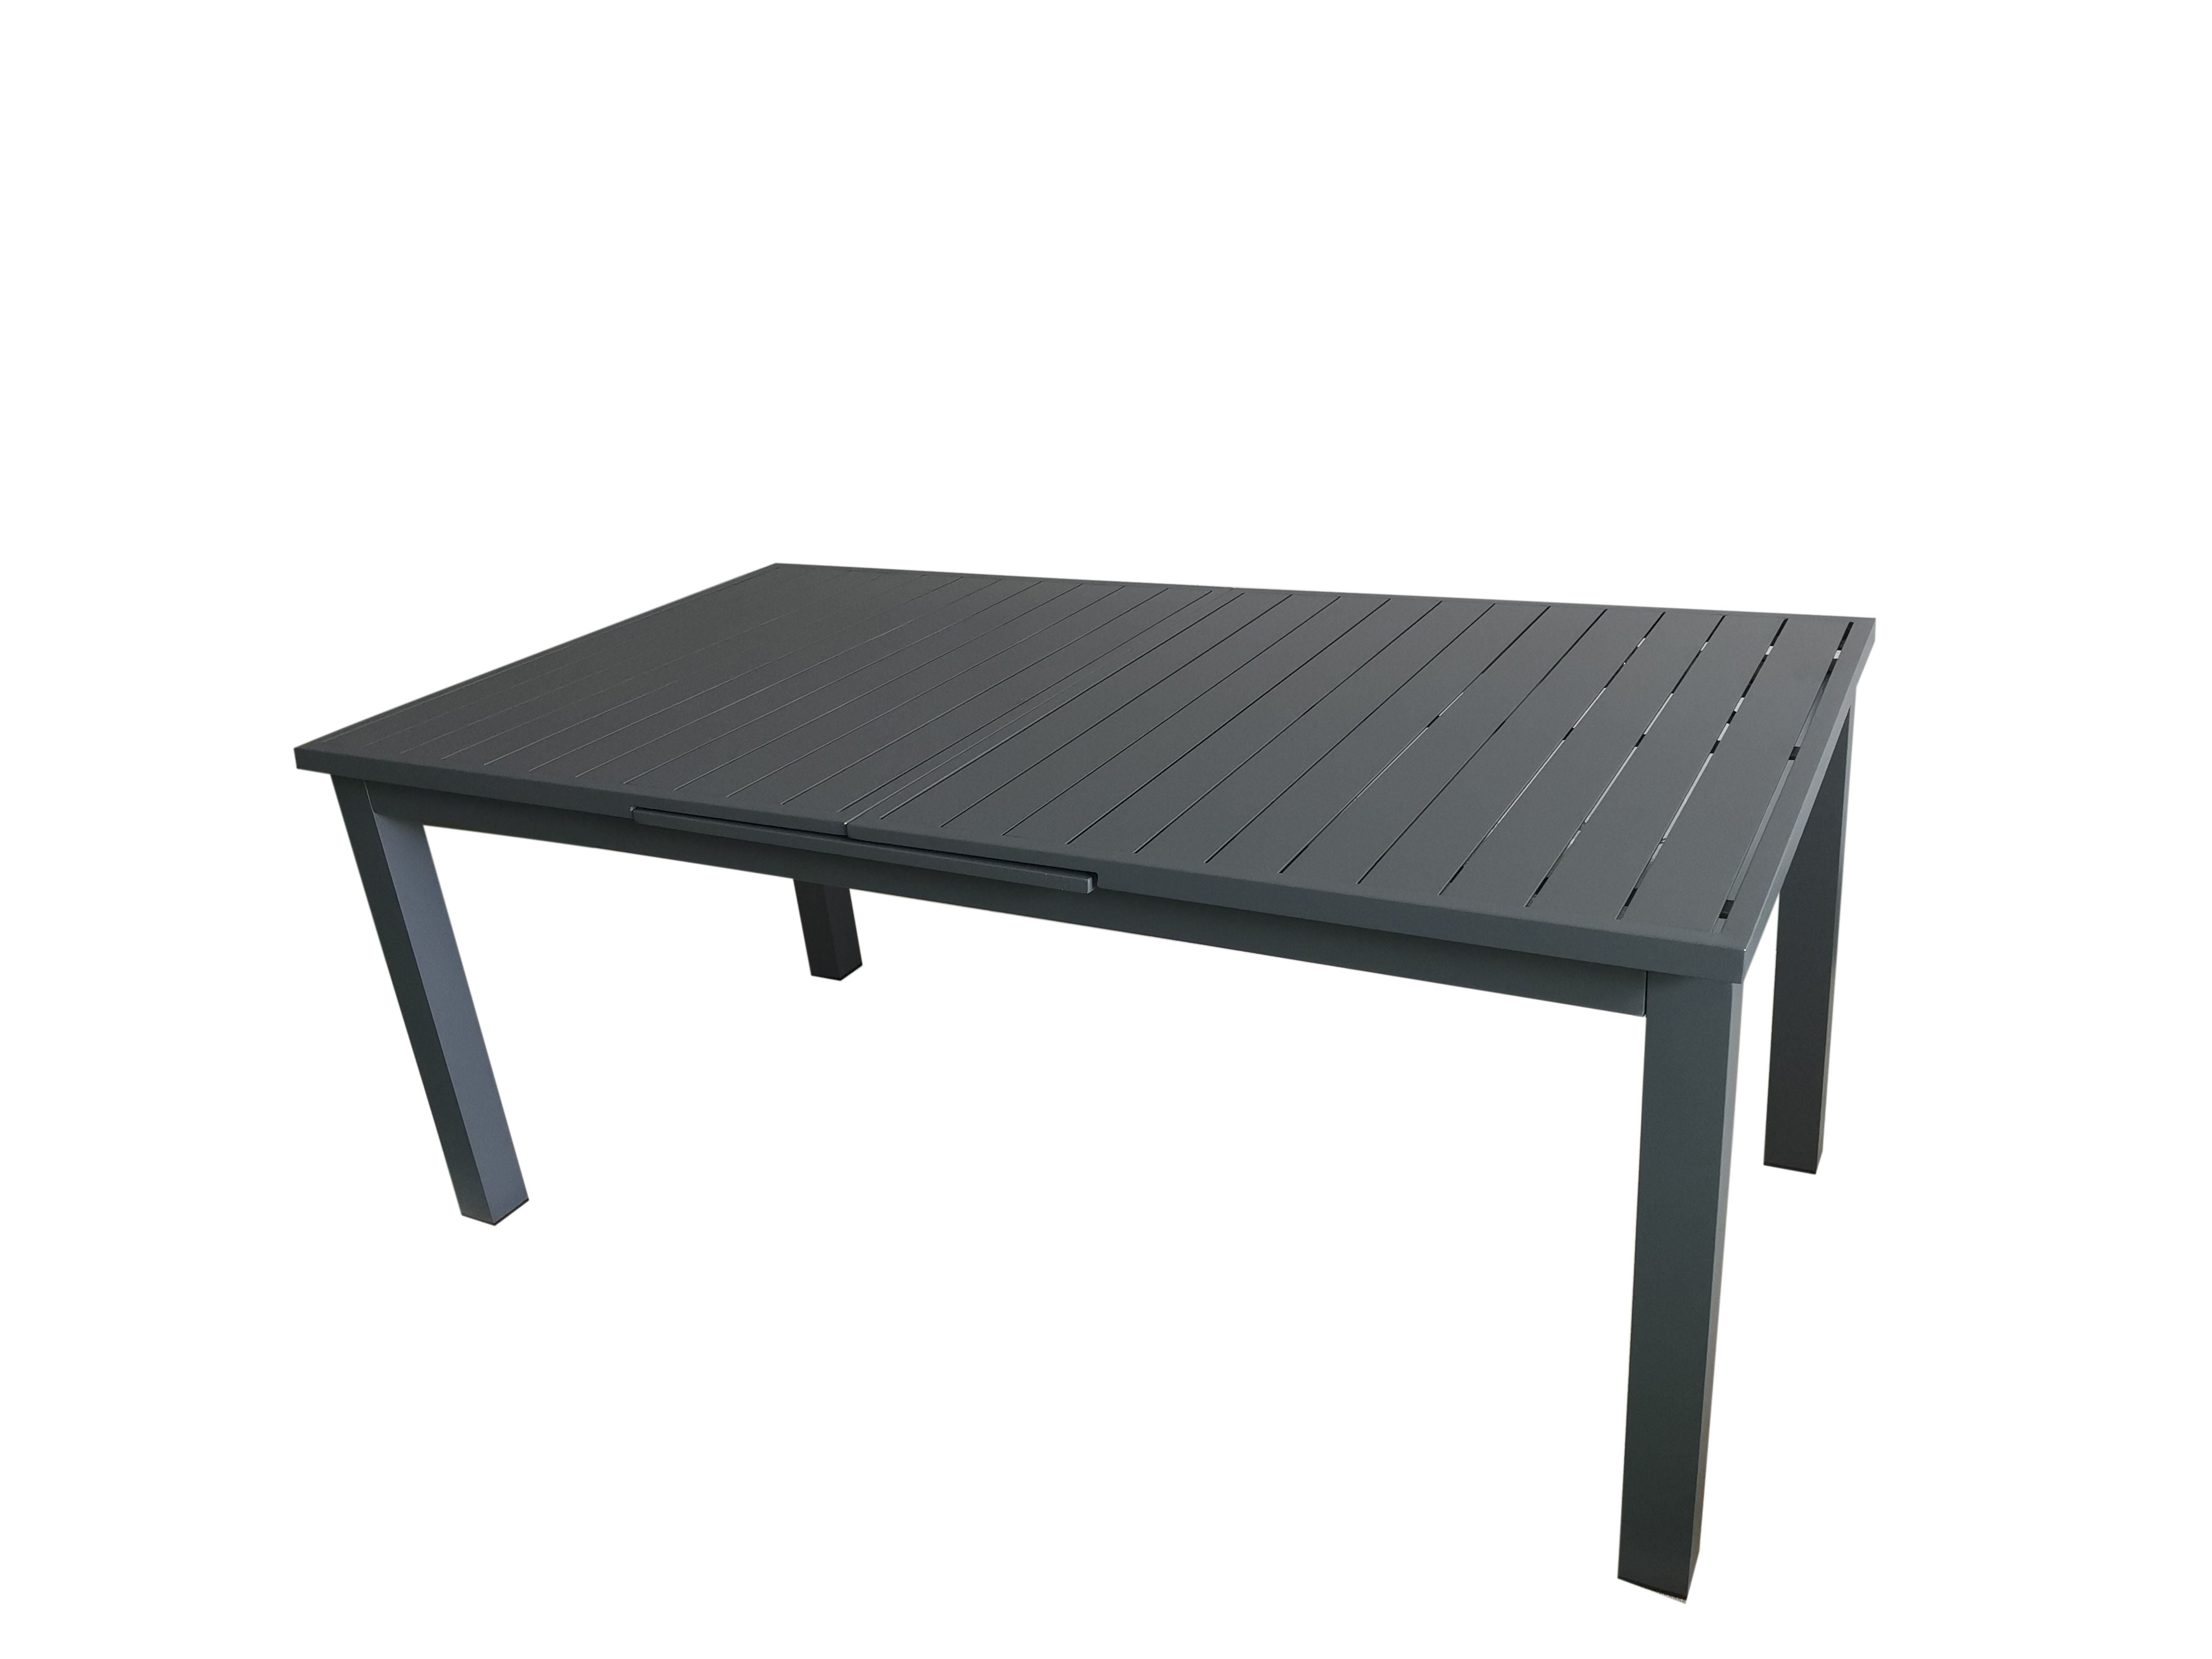 PatioZone Extendable Dining Table with Slated Tabletop (Sliding Mechanism) Aluminum Frame (MOSS-T306C) - Matte Charcoal